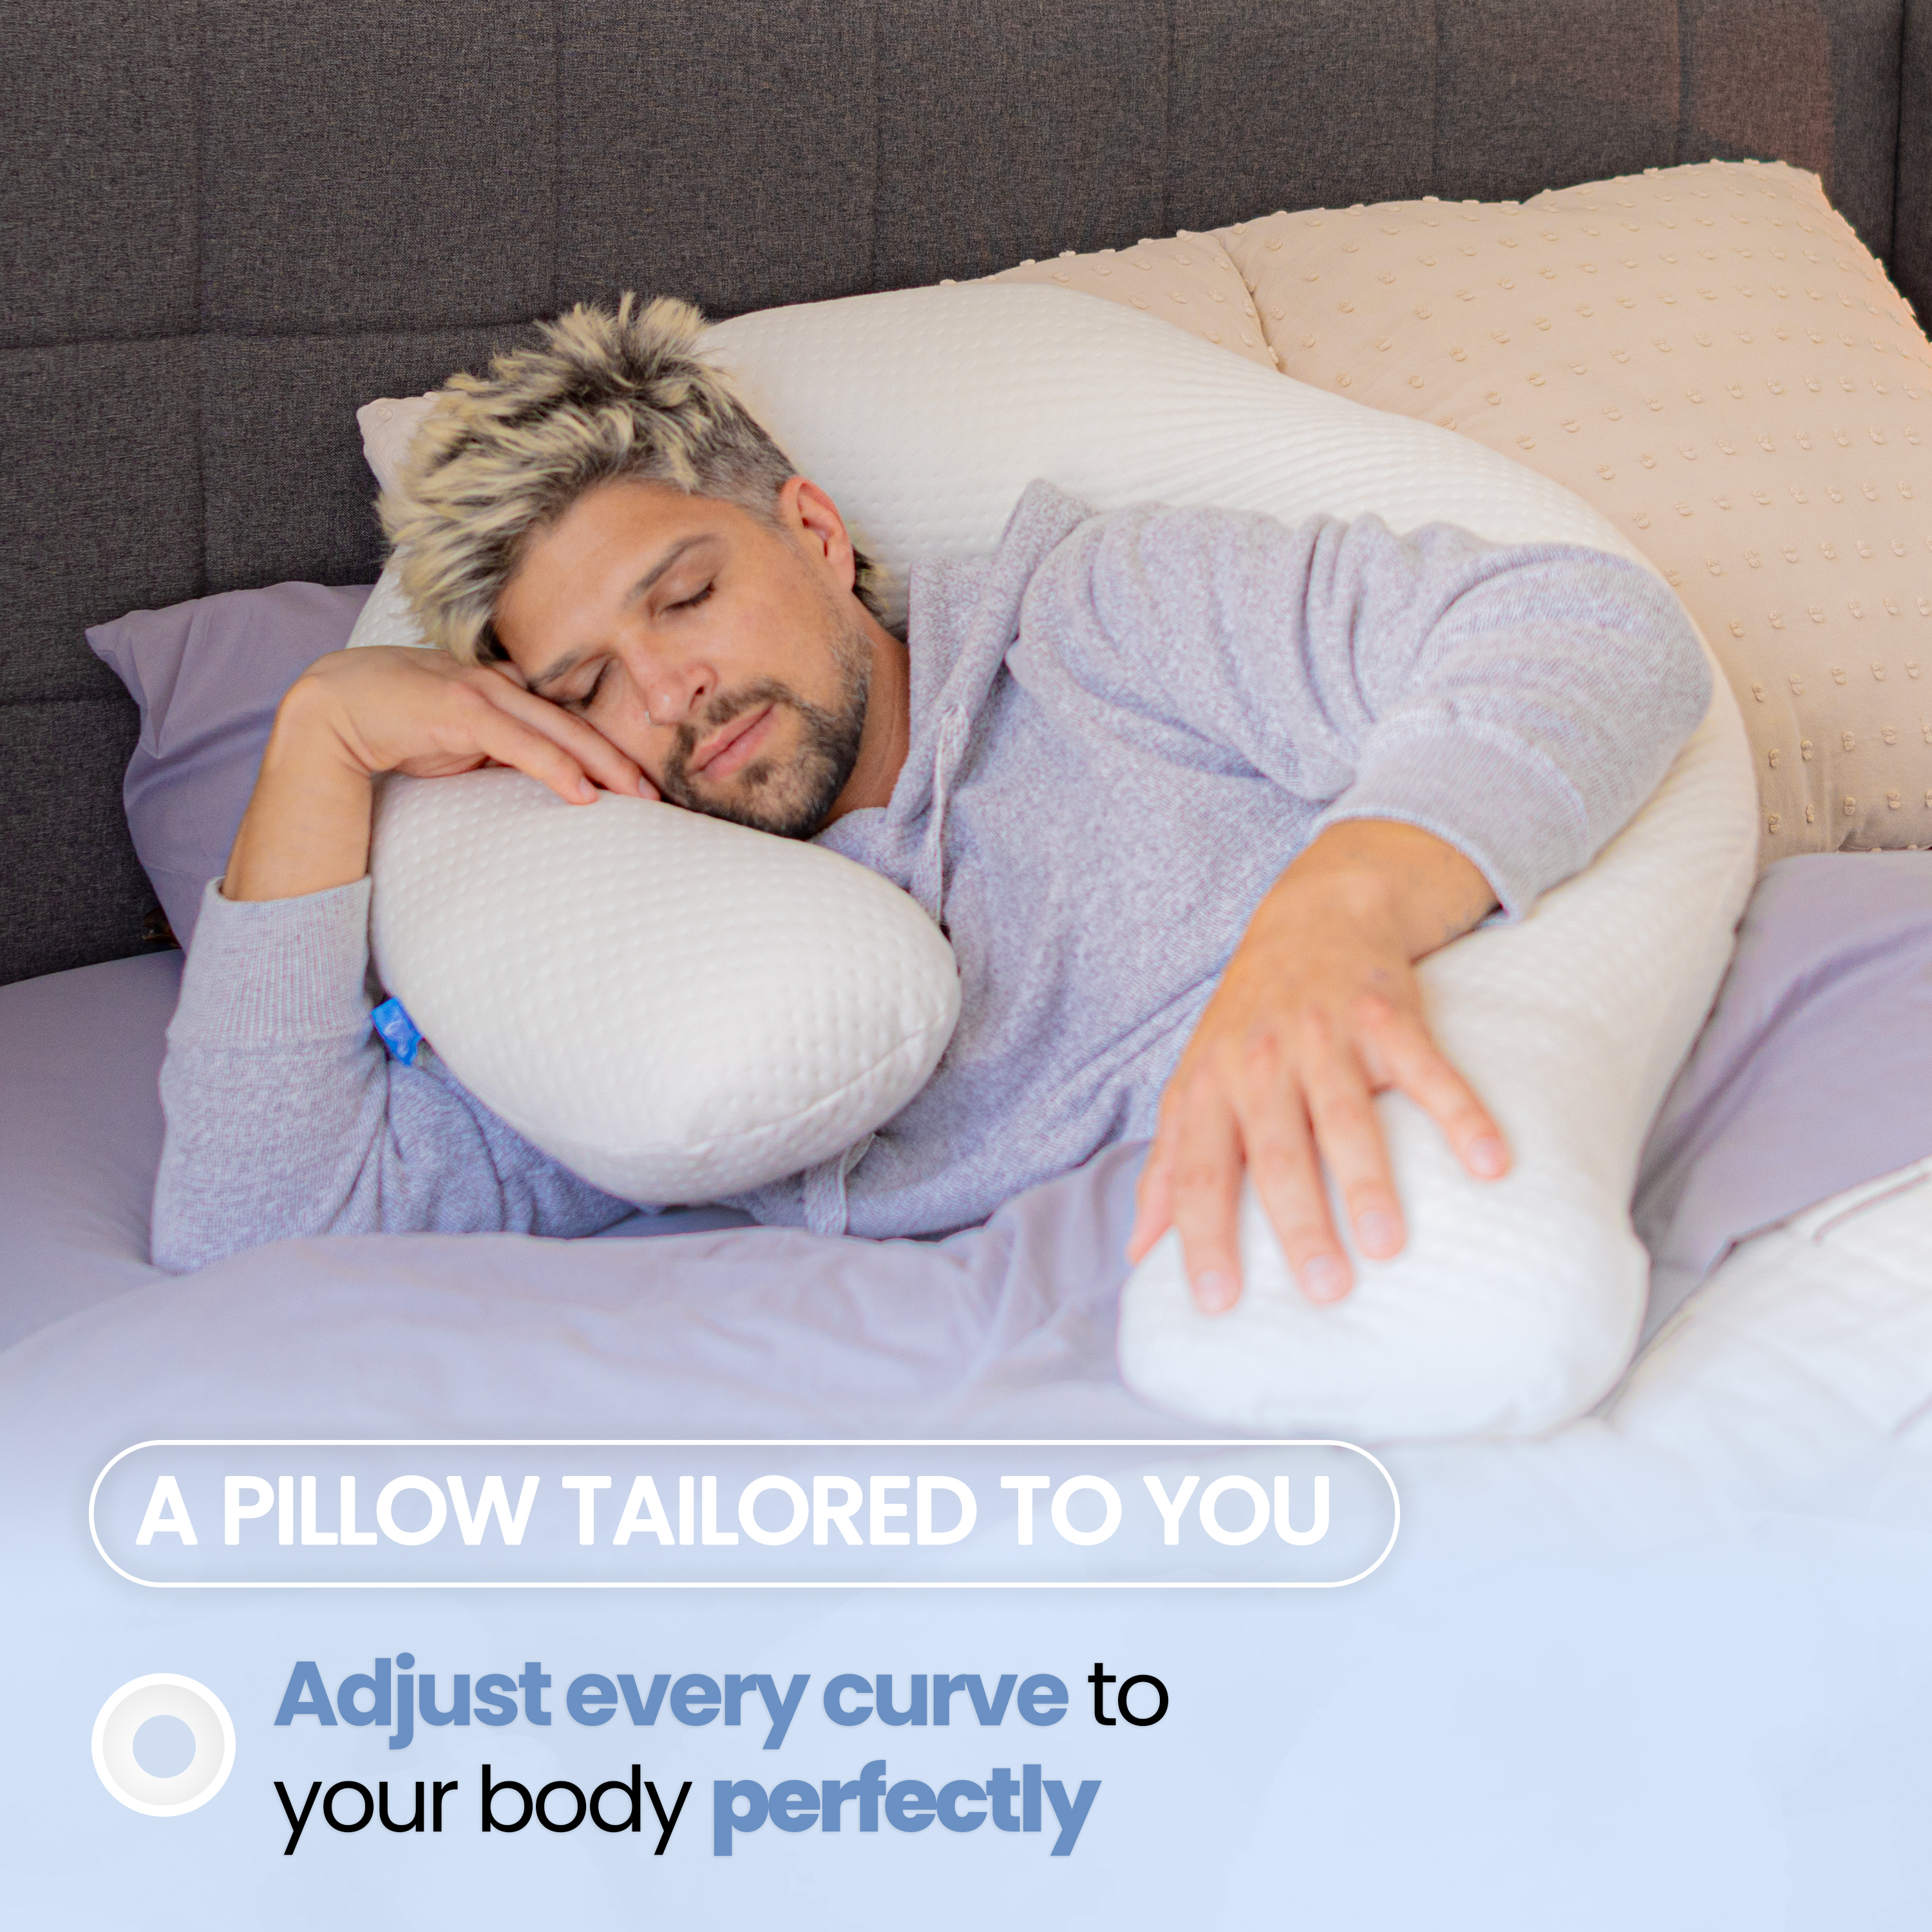 Contour Swan Body Support Pillow - Sleep Well All Night